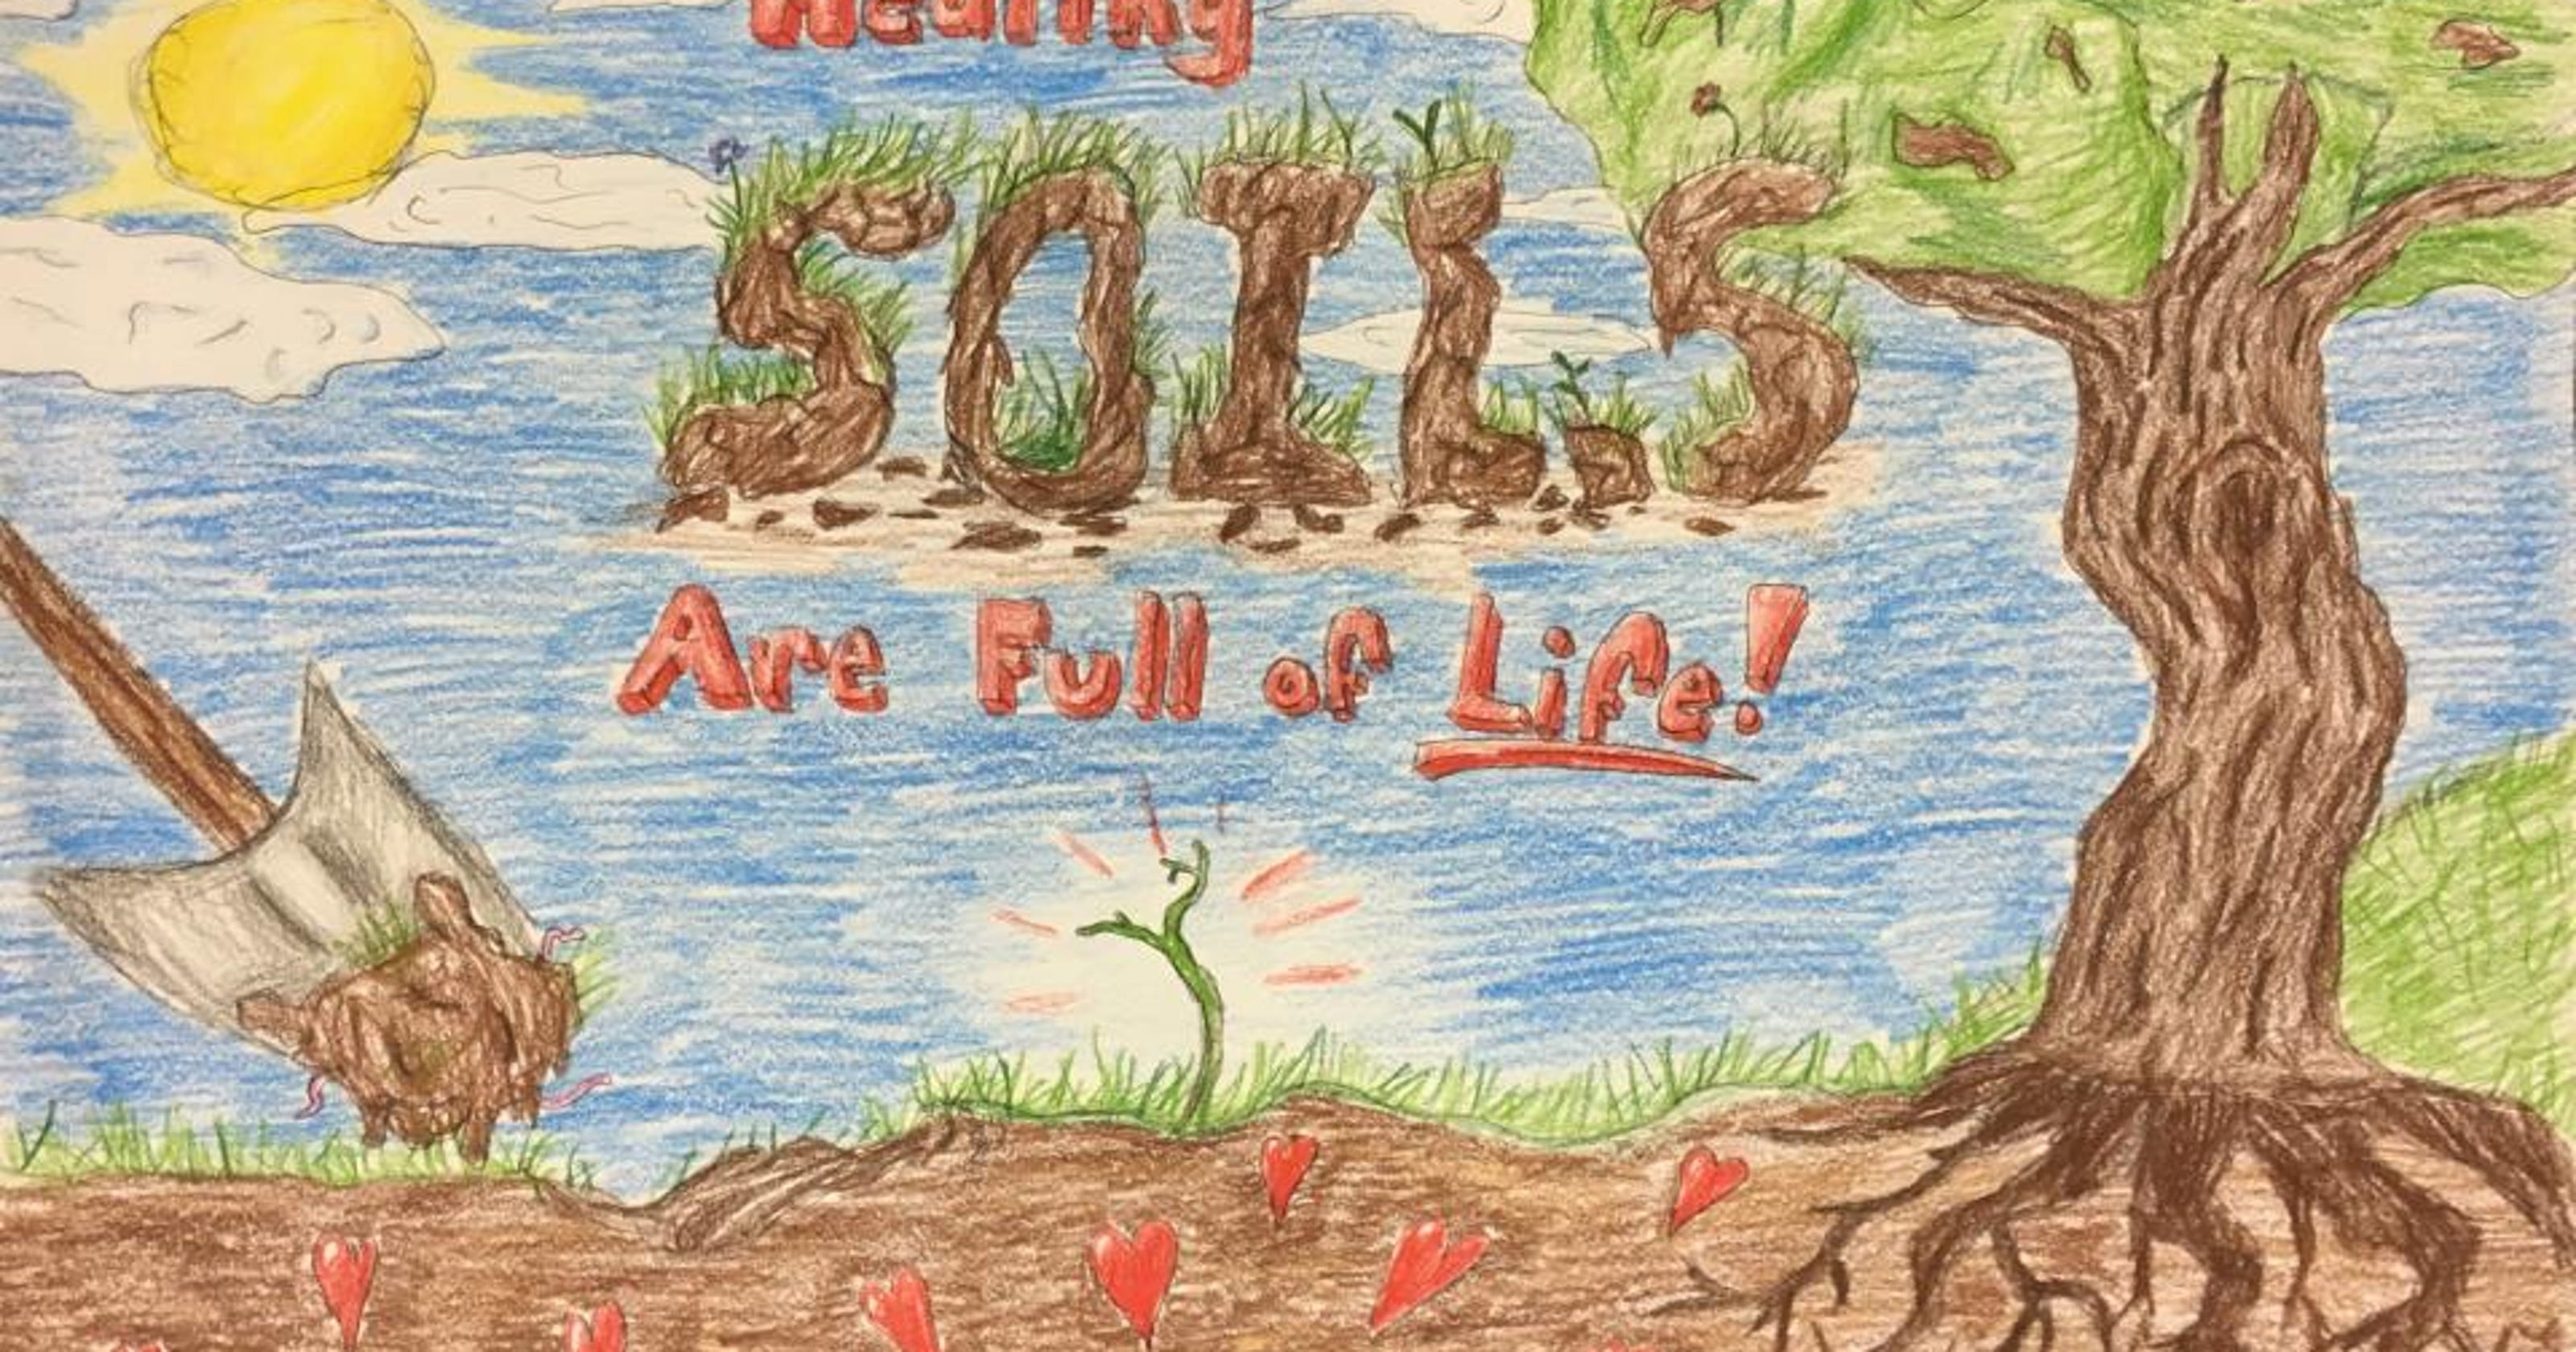 2017 Conservation and Environmental Awareness Poster Contest winners